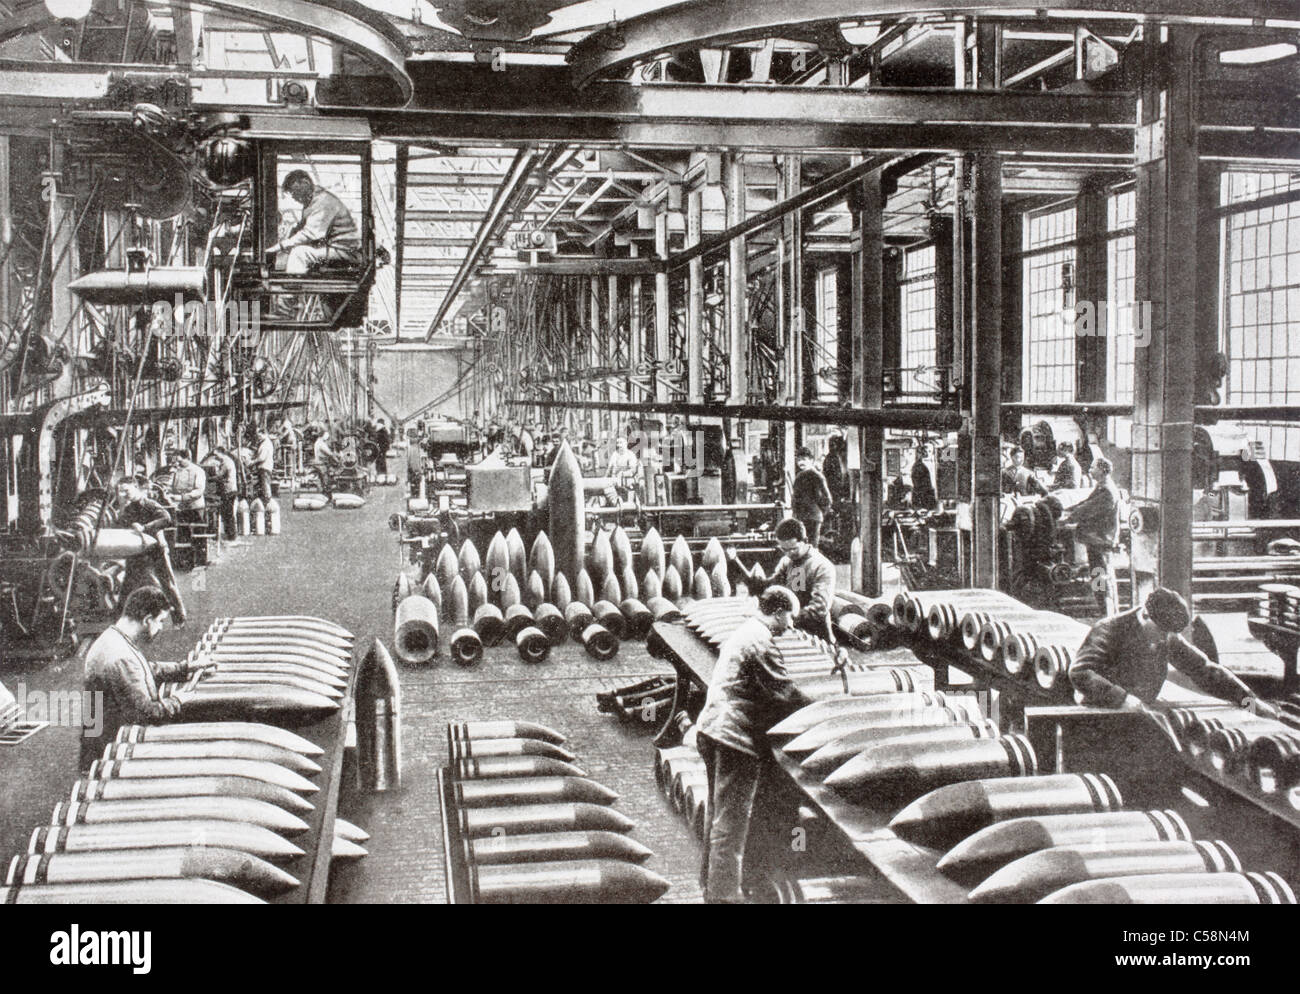 A Krupp factory in Germany producing shells during the First World War. Stock Photo